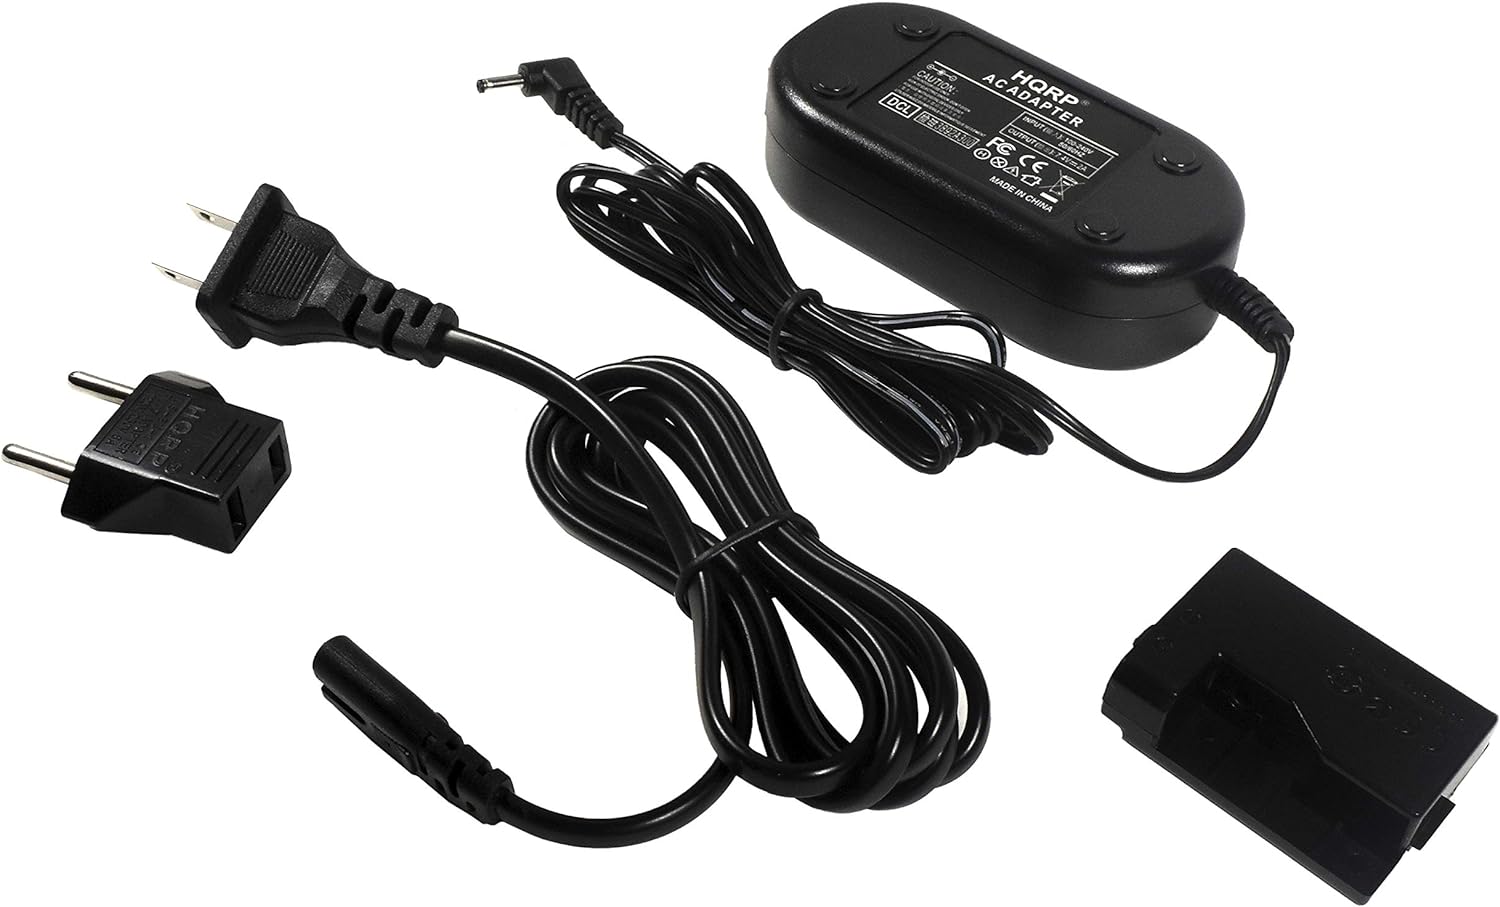 Kit AC Power Adapter Compatible with Canon ACK-E10 ACKE10 EOS T3 T5 T6 T7 T100, 1200D 1100D 1300D 1500D 2000D 4000D Kiss - Click Image to Close